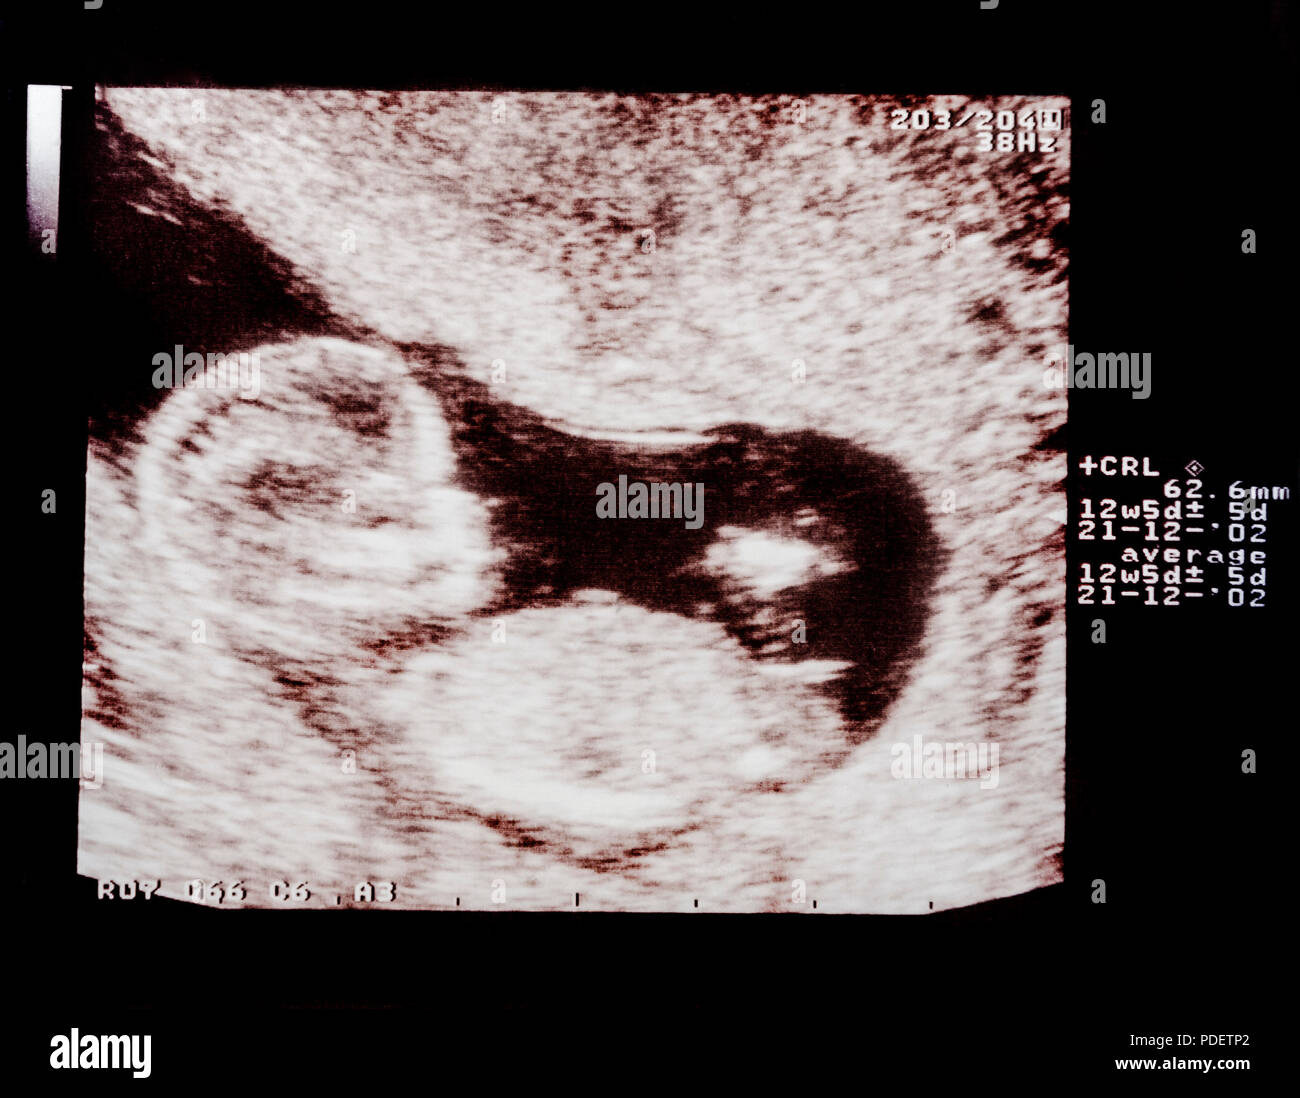 First trimester antenatal ultrasound scan at 3 month pregnancy health check up Stock Photo